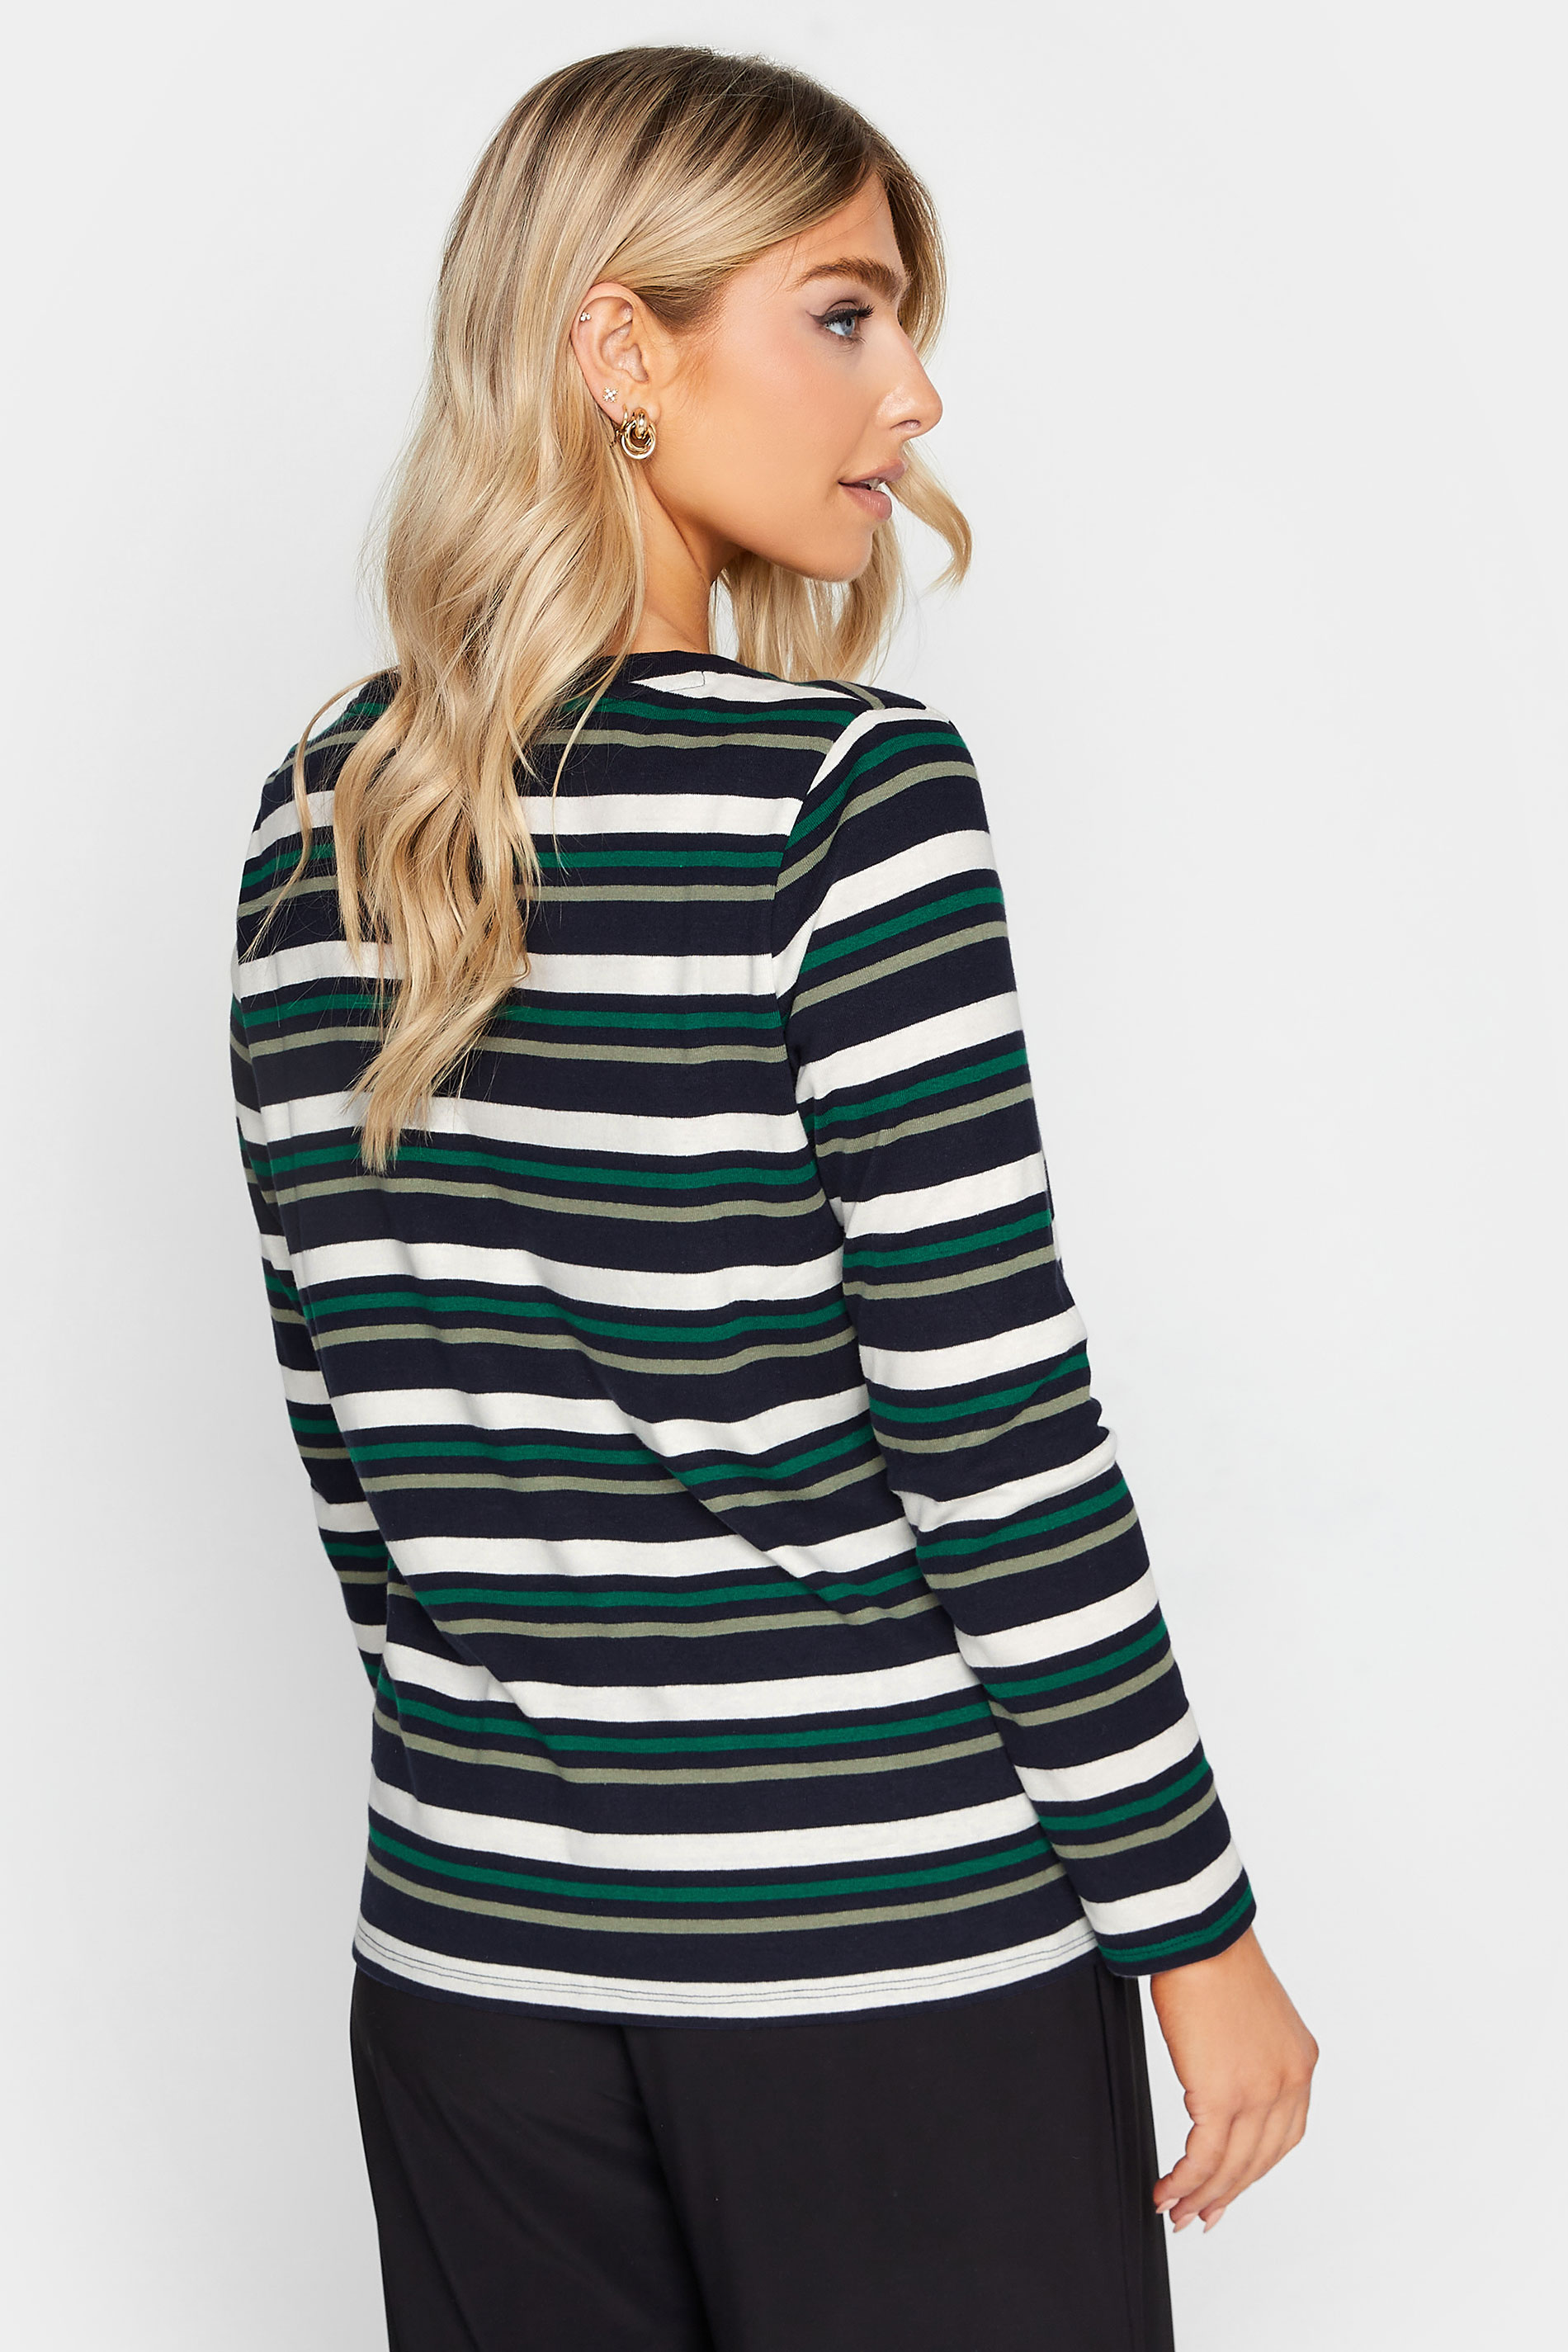 M&Co Green Teal Stripe Cotton Blend Long Sleeve Top | M&Co 3